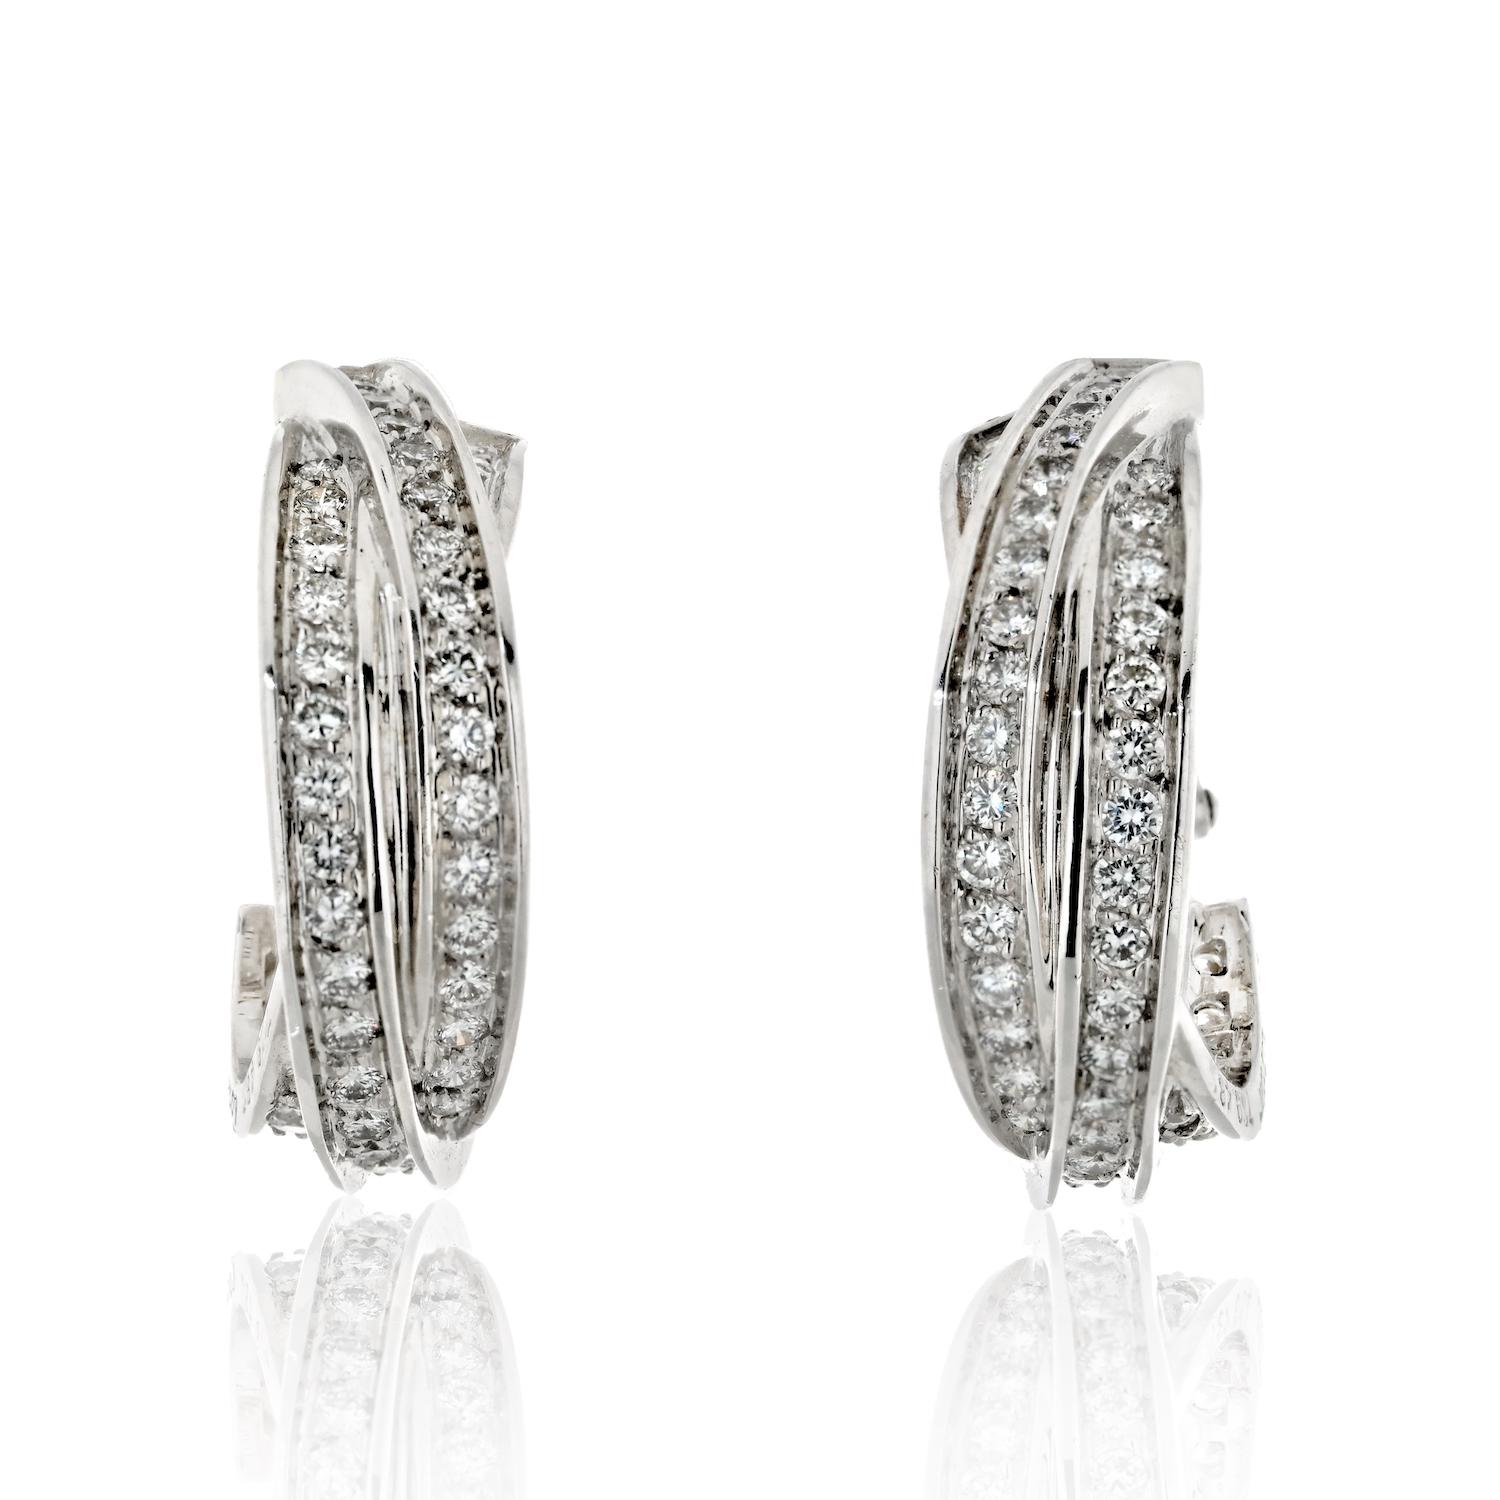 The Cartier 18K White Gold Trinity Diamond Short Hoop Earrings are a stunning piece of jewelry designed for pierced ears. The earrings feature a classic hoop shape with a sleek white gold finish, and are adorned with shimmering diamonds that add a